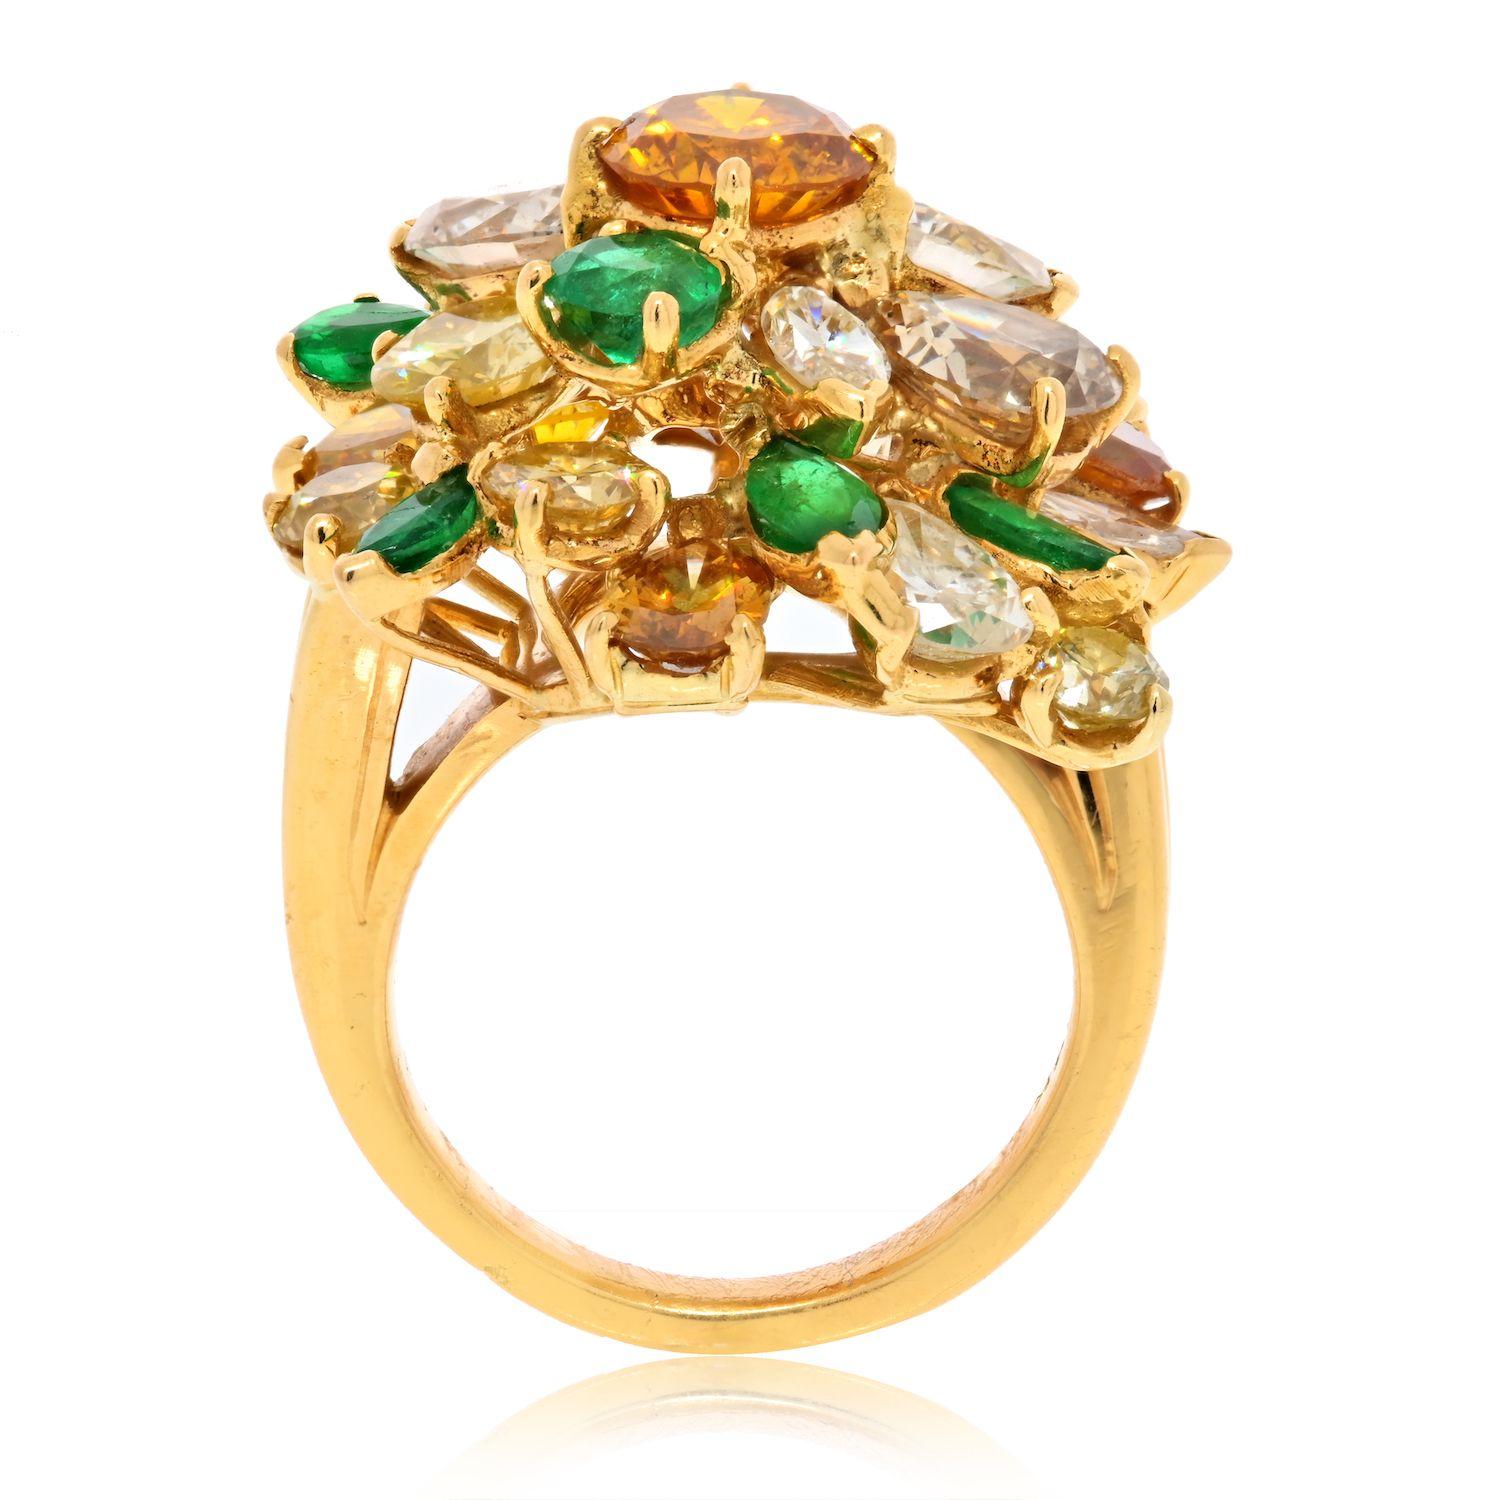 18K Yellow Gold Tutti Frutti Diamond And Color Stones Ring. Fun ring with a vintage touch encrusted with white diamonds, green emeralds of various sizes and pink sapphires. Wear this ring to a party or make your every day ring. 
Diamond Weight: